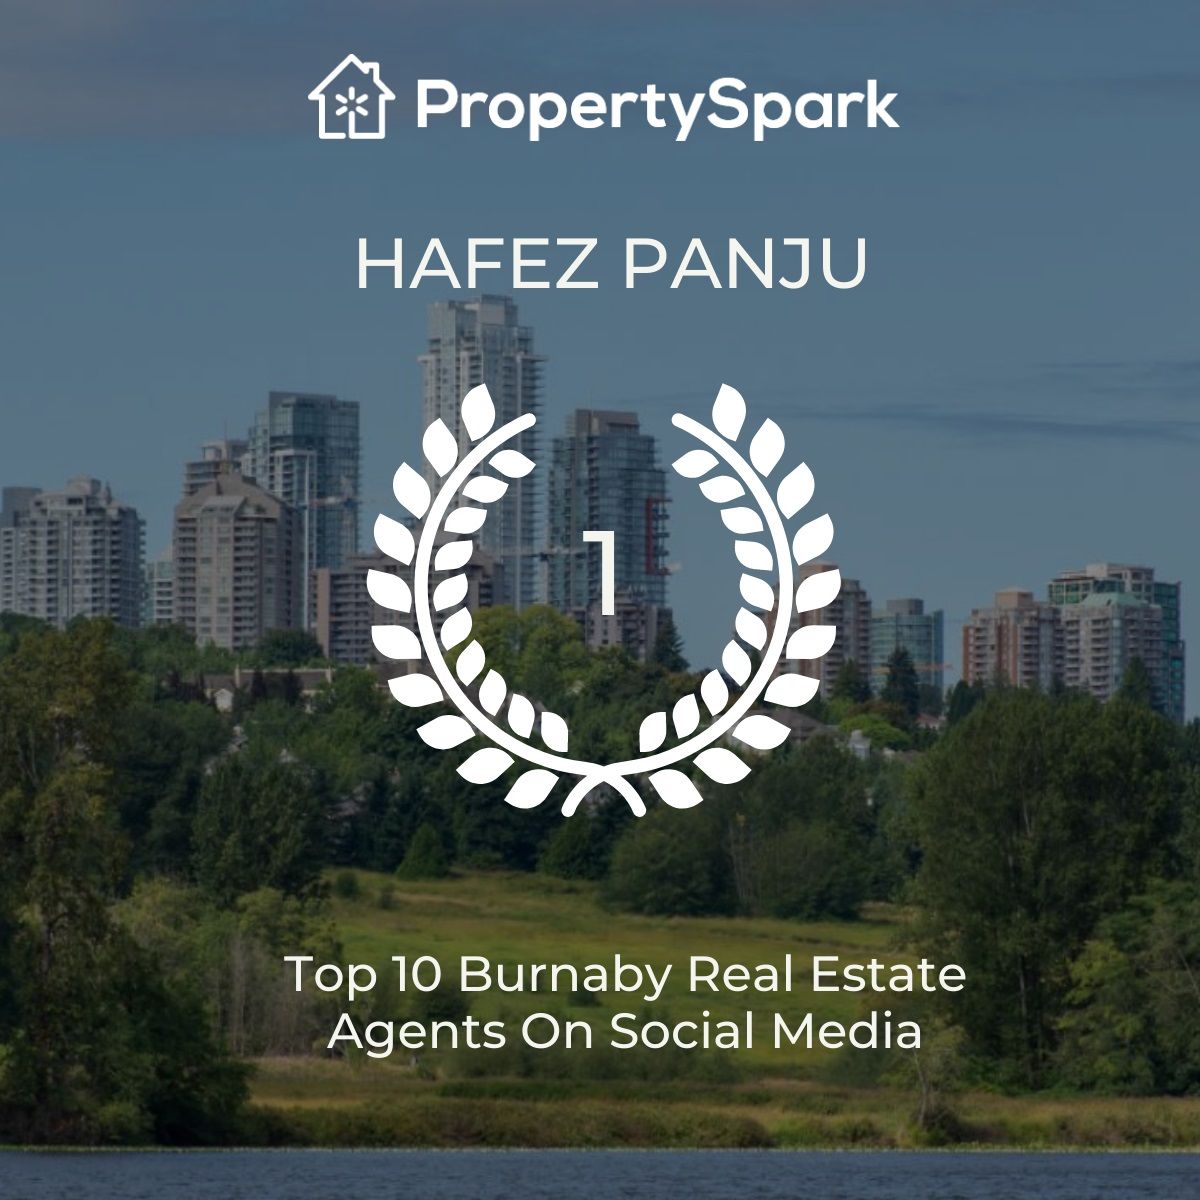 Thrilled To Be Ranked #1 in Social Media in Burnaby  